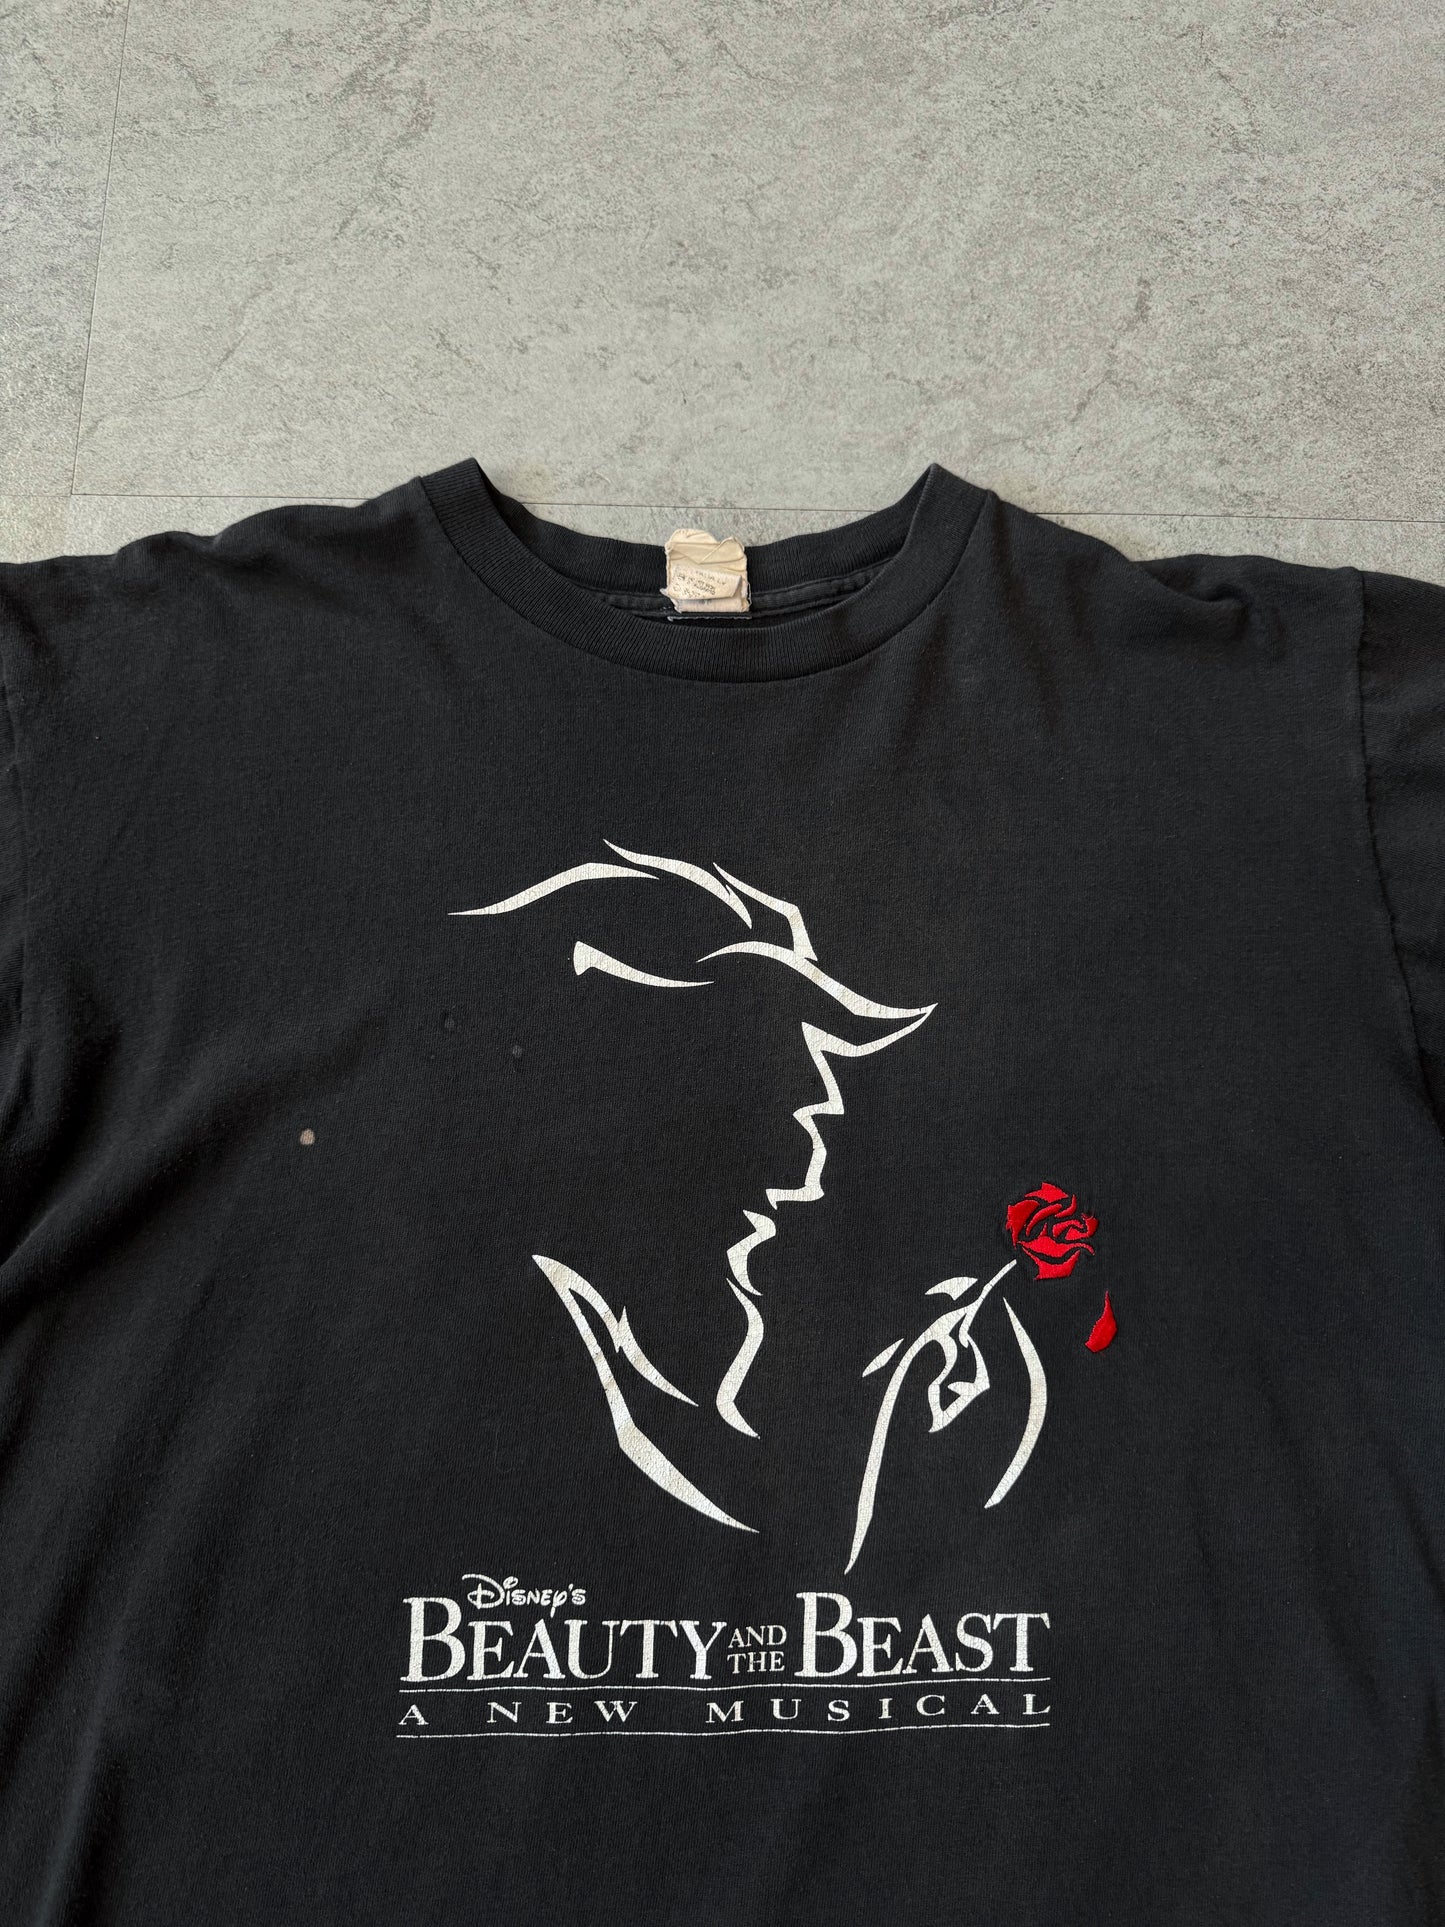 1994 Vintage Beauty and the Beast